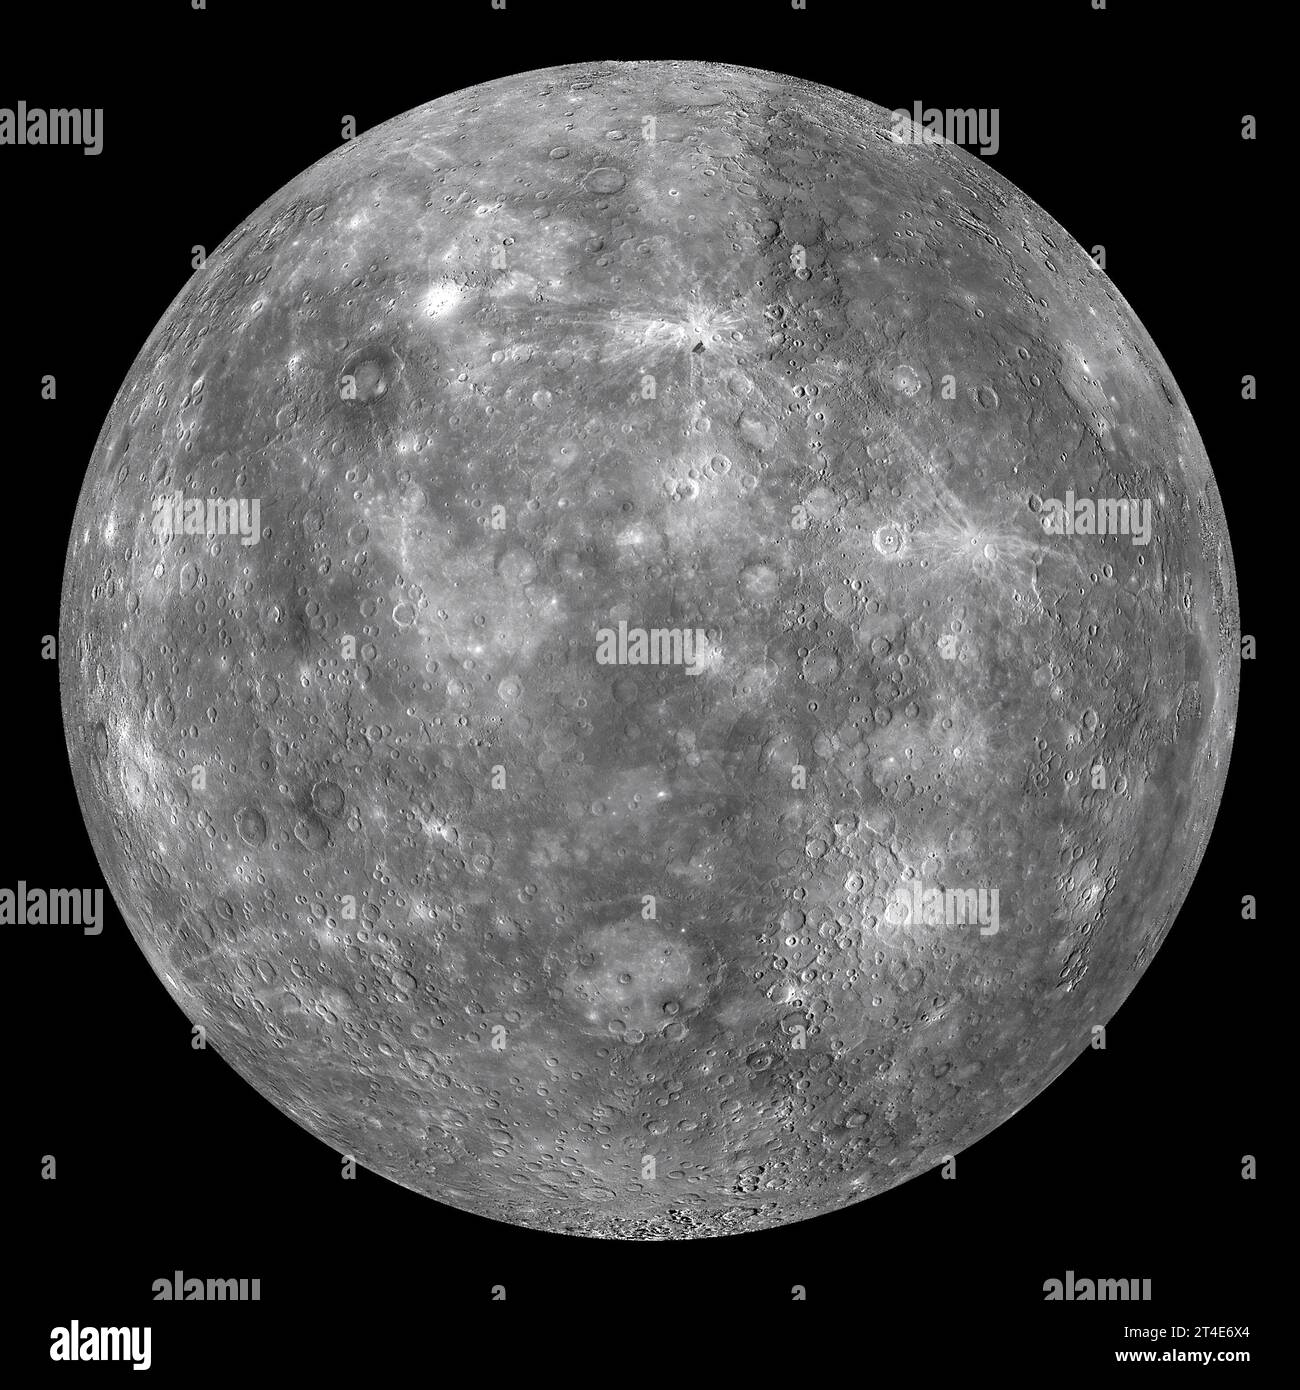 Mercury. View of the planet mercury taken from the Messenger spacecraft, 2011. Stock Photo